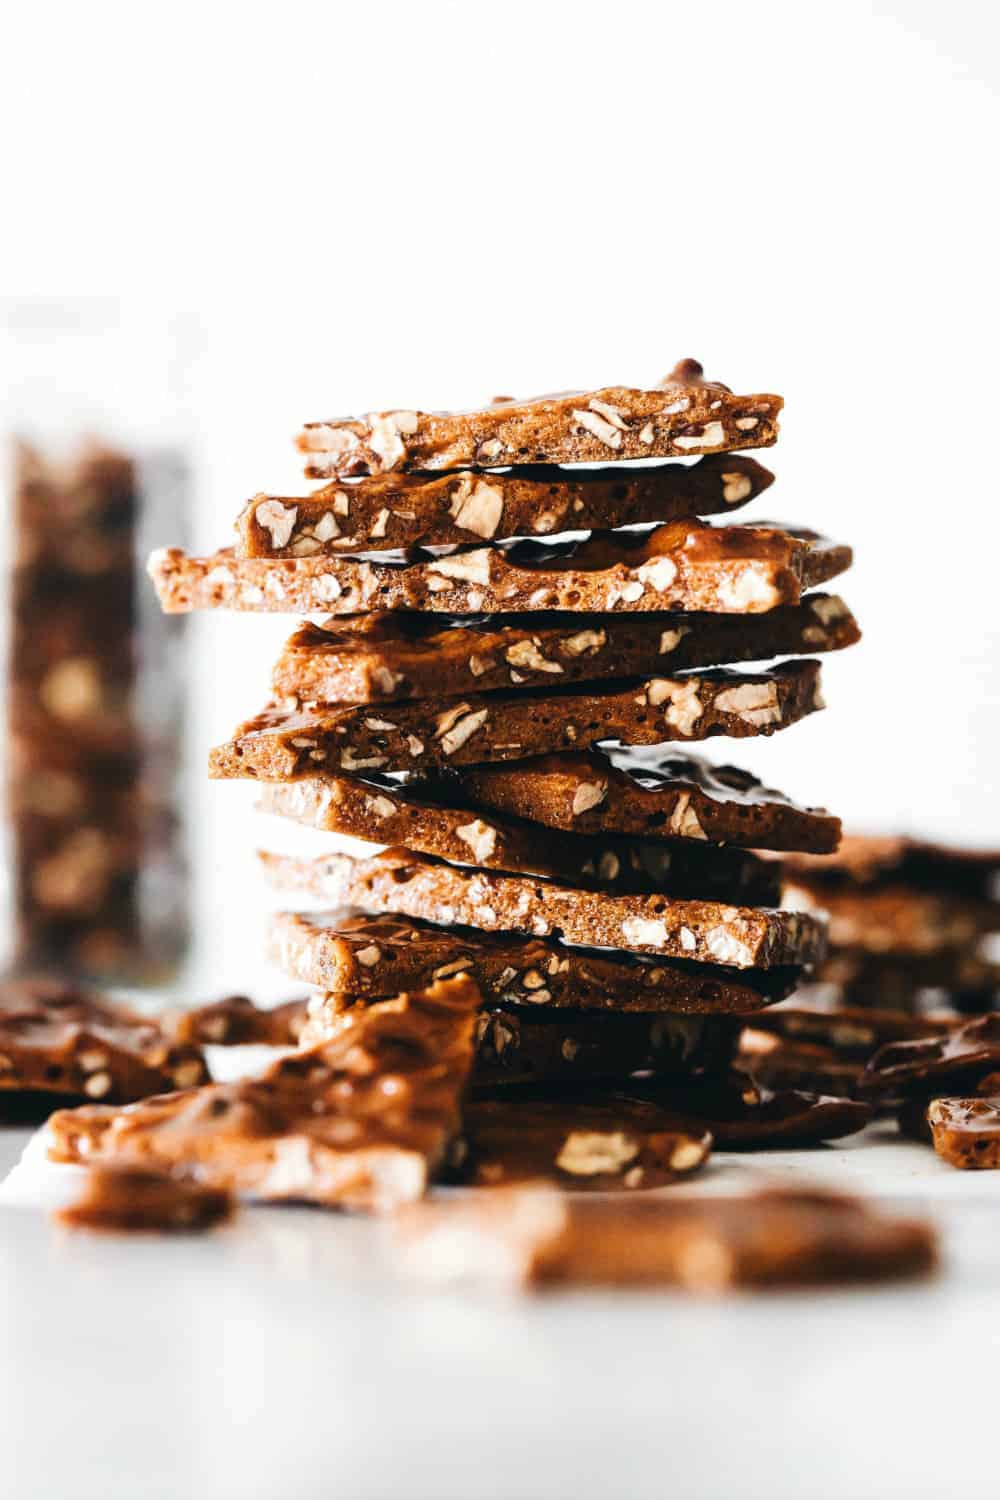 Pieces of pecan brittle stacked on top of each other